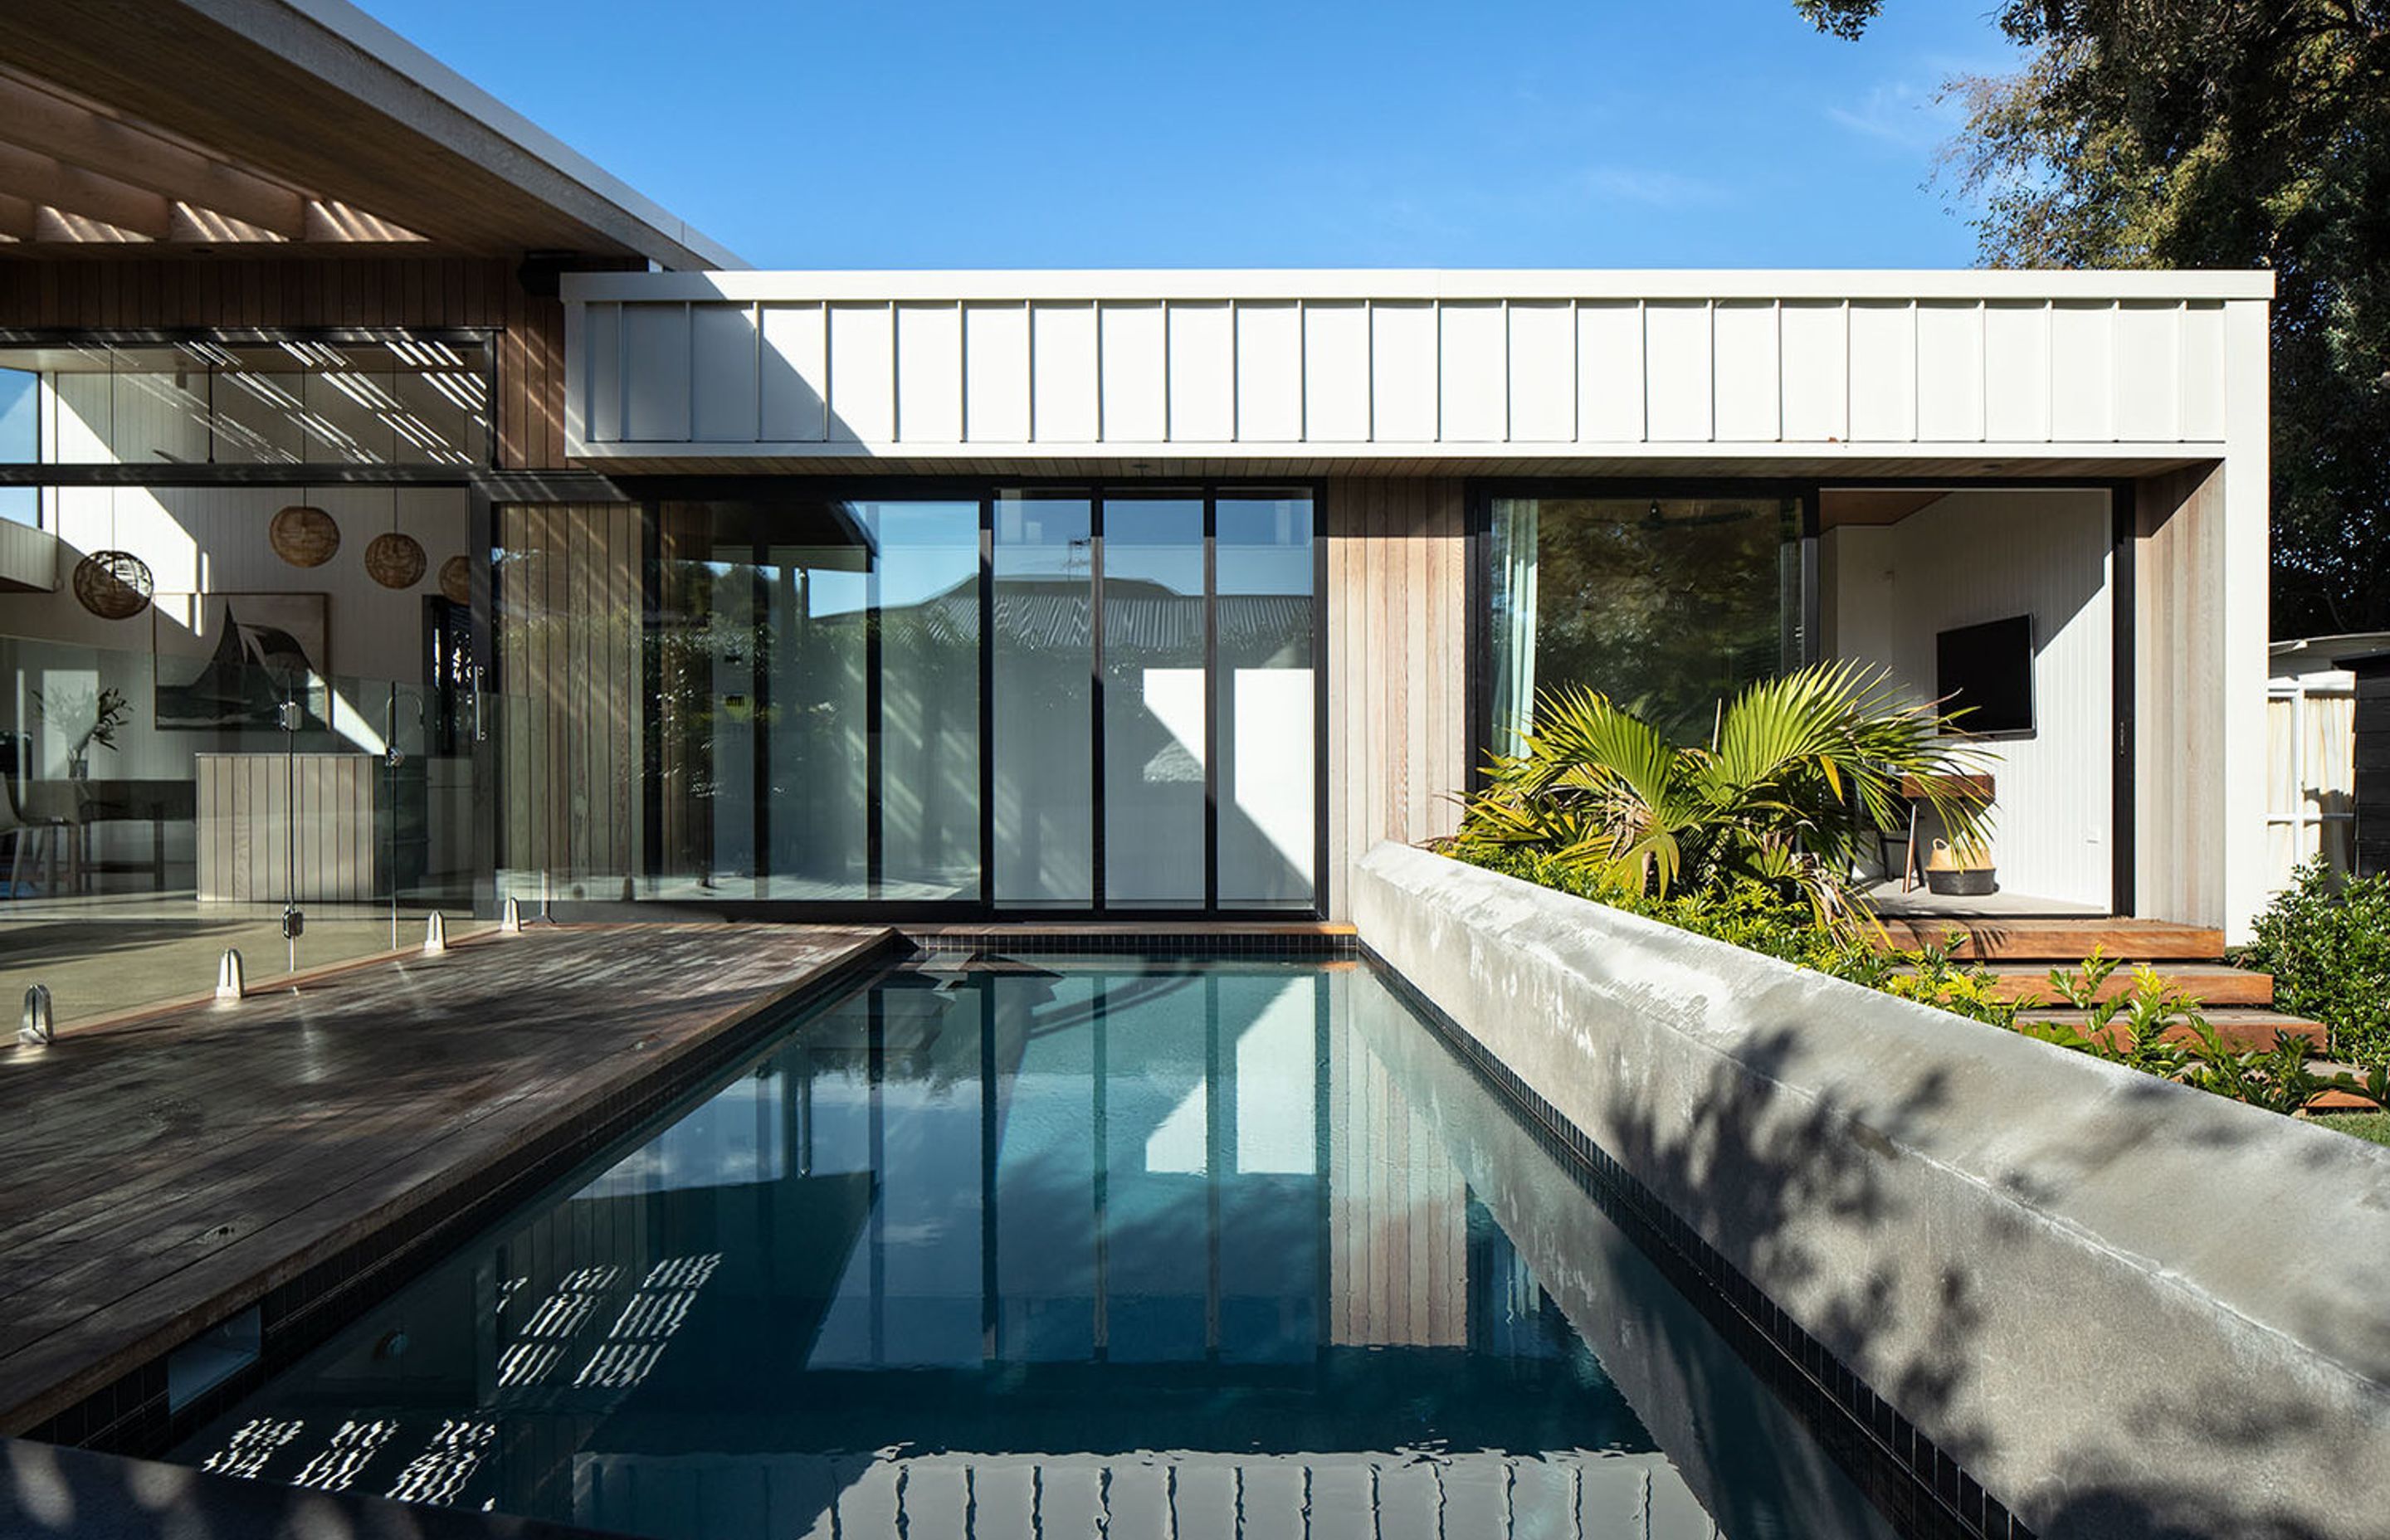 The bedrooms are recessed under the eaves to help control the entry of sunlight, while reflected watery patterns are cast onto the interior surfaces from the pool.